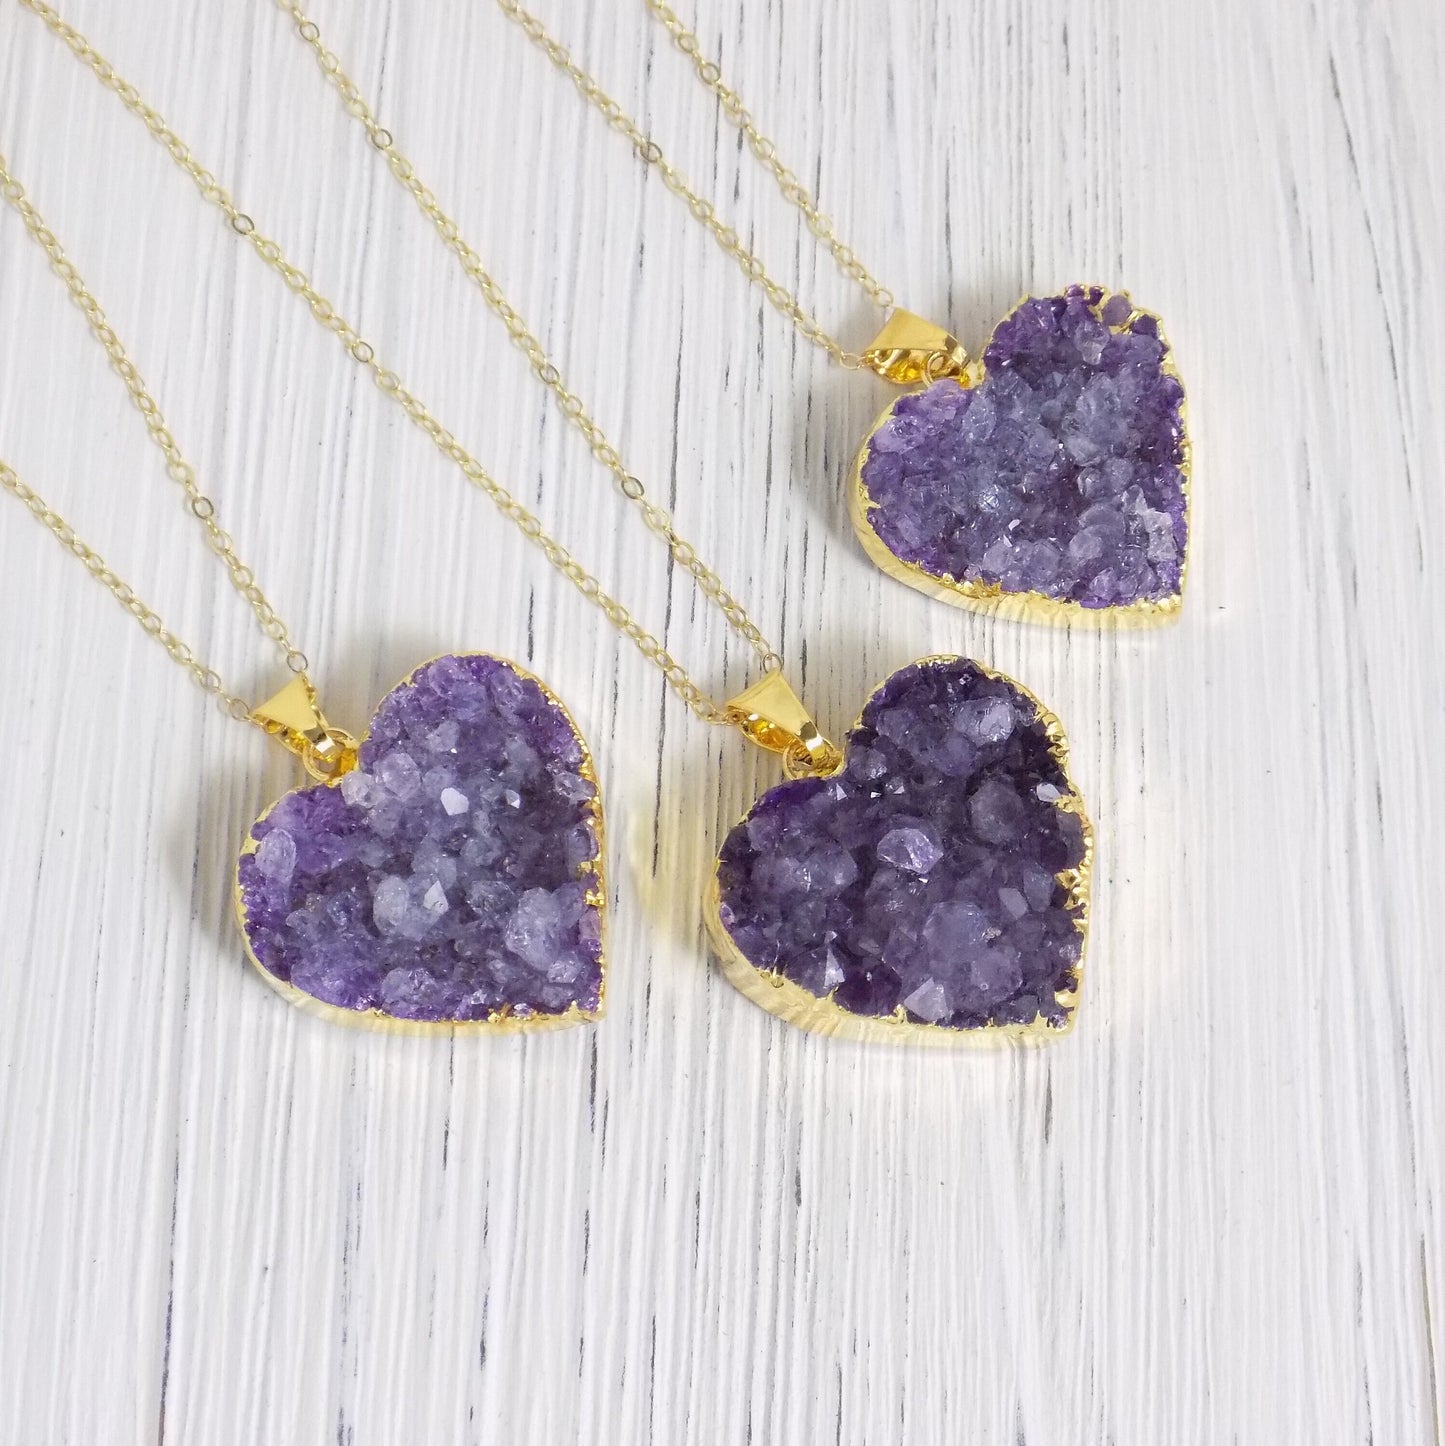 Amethyst Necklace Gold - Amethyst Heart Necklace